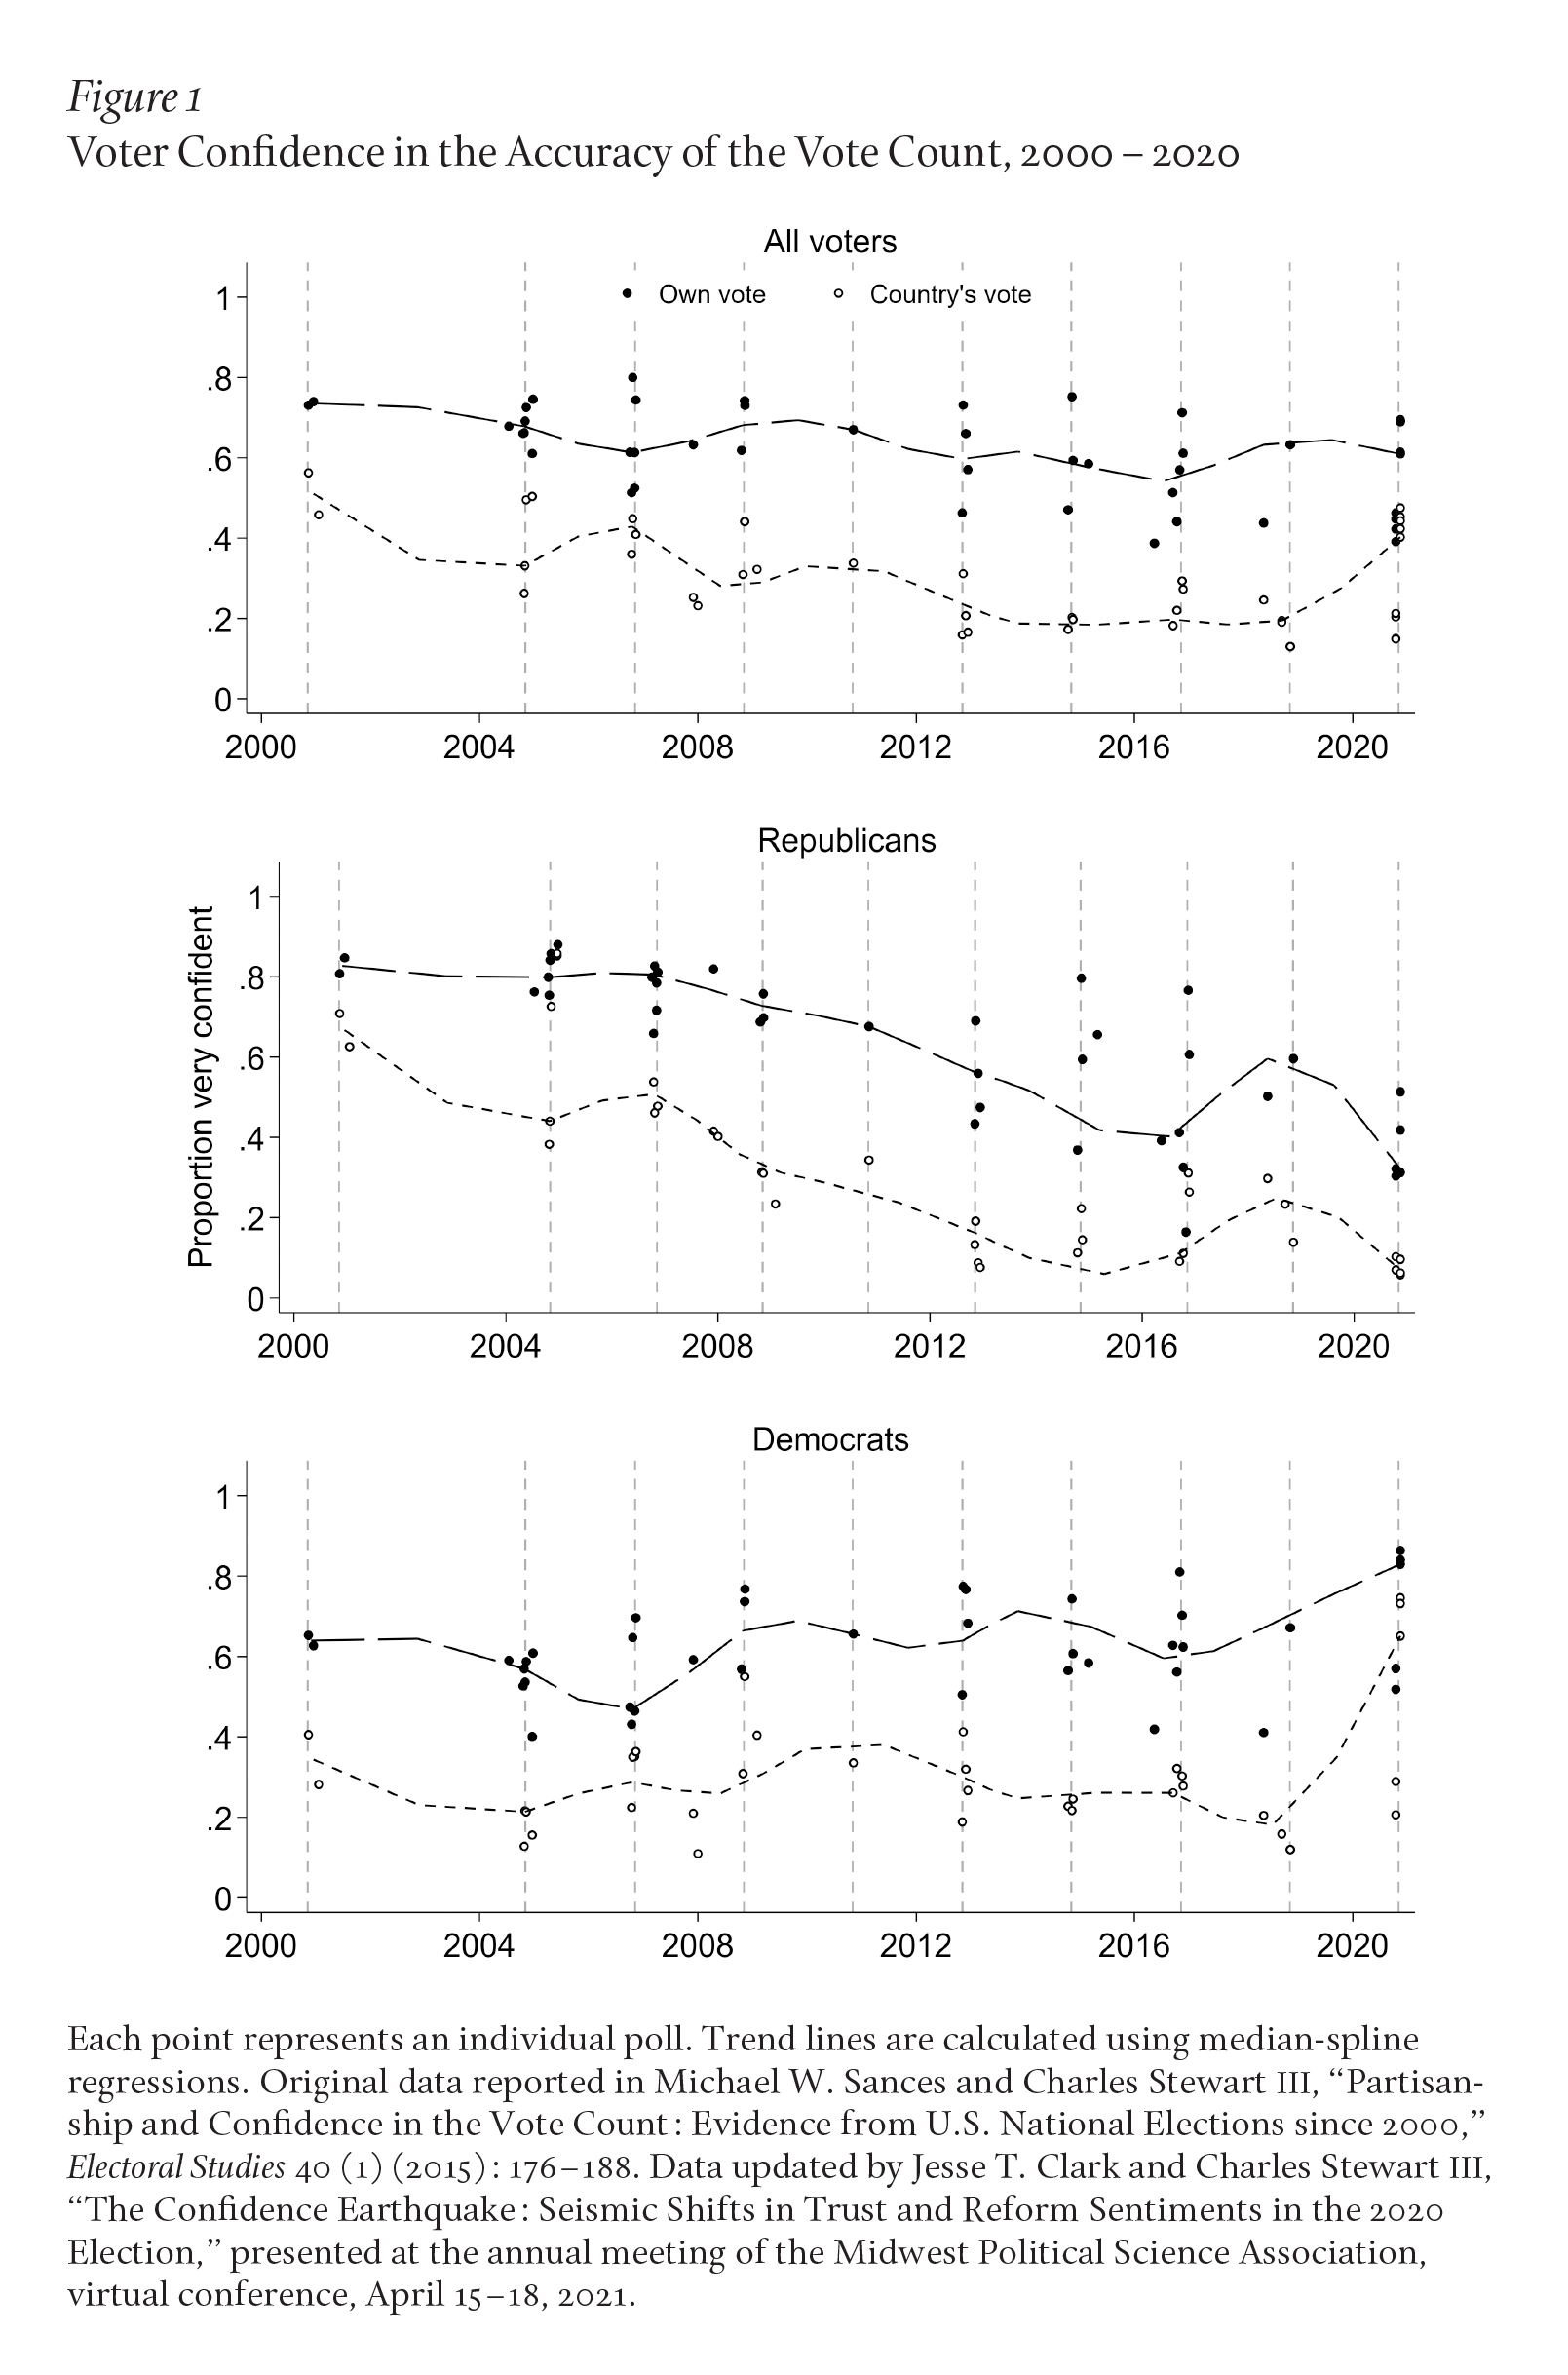 Figure 1 shows that confidence that one's own vote has been counted correctly typically outpaces confidence that the nation's votes were counted as a whole. Looking at responses by individual political party shows that the downward trend in confidence has been driven by Republicans.